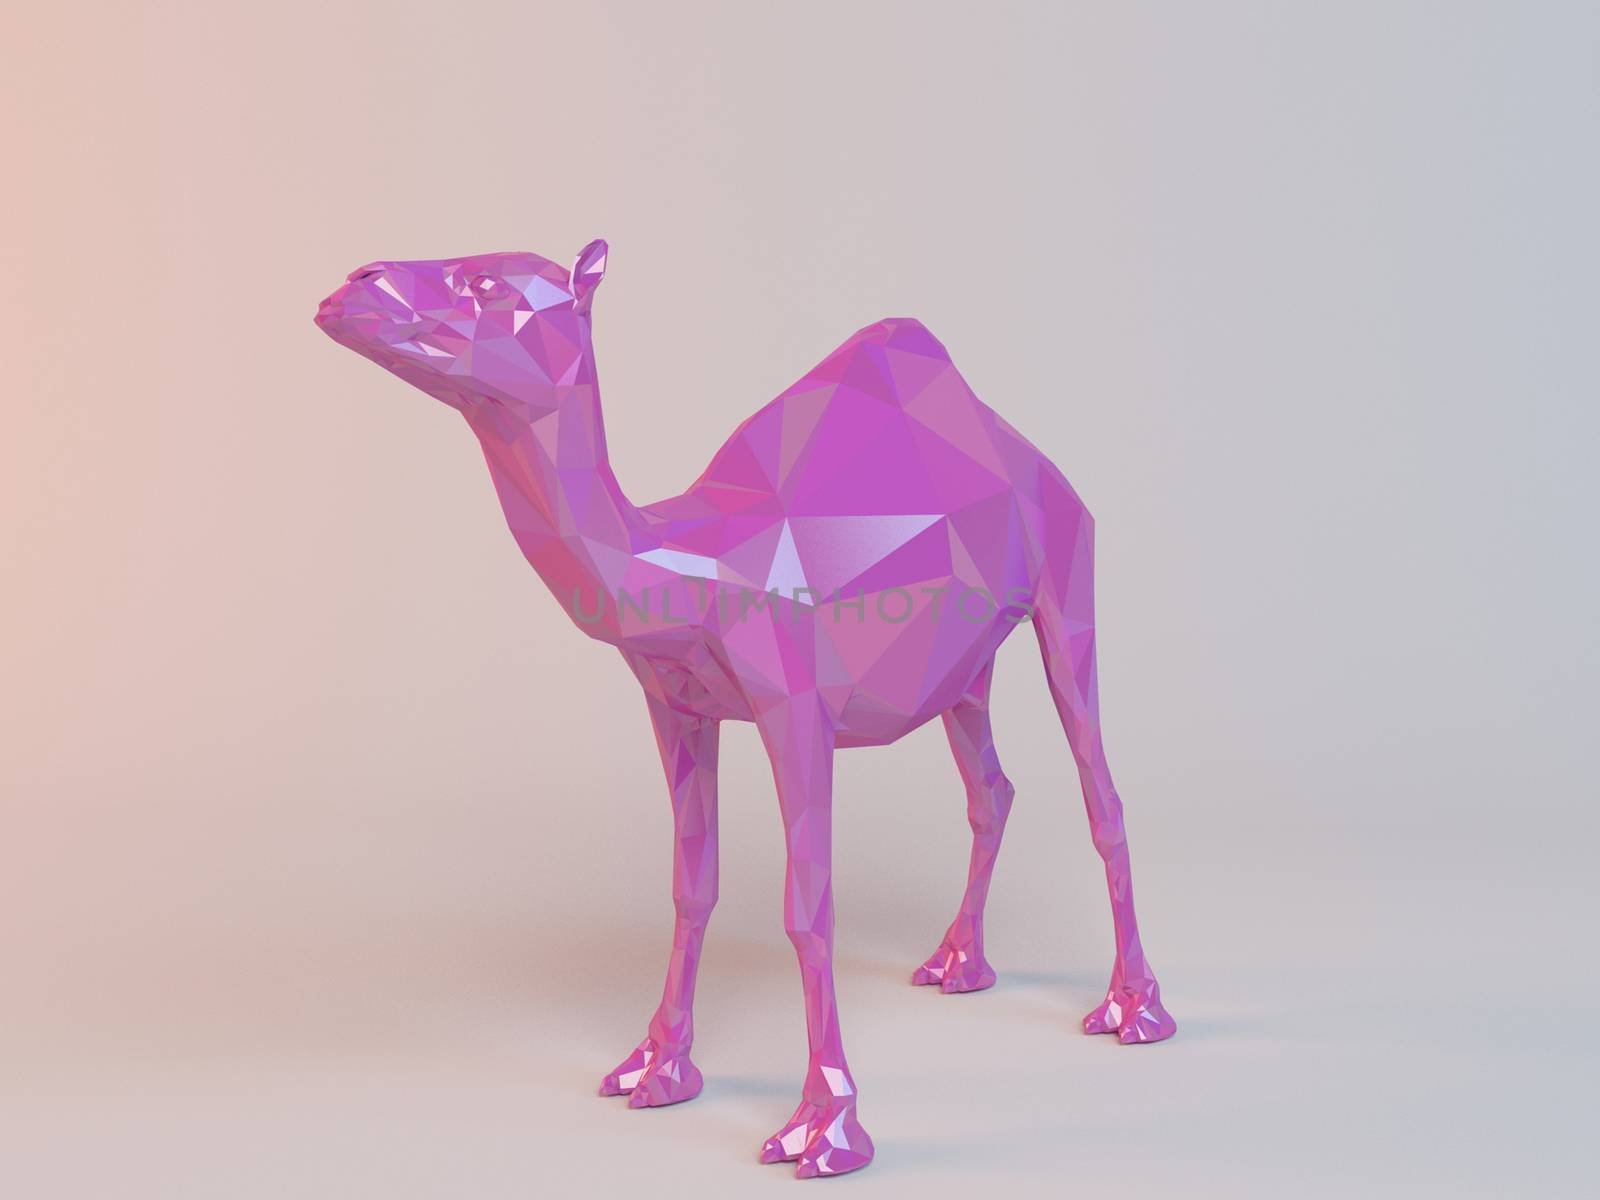 3D pink low poly (camel) inside a white stage with high render quality to be used as a logo, medal, symbol, shape, emblem, icon, children story, or any other use.